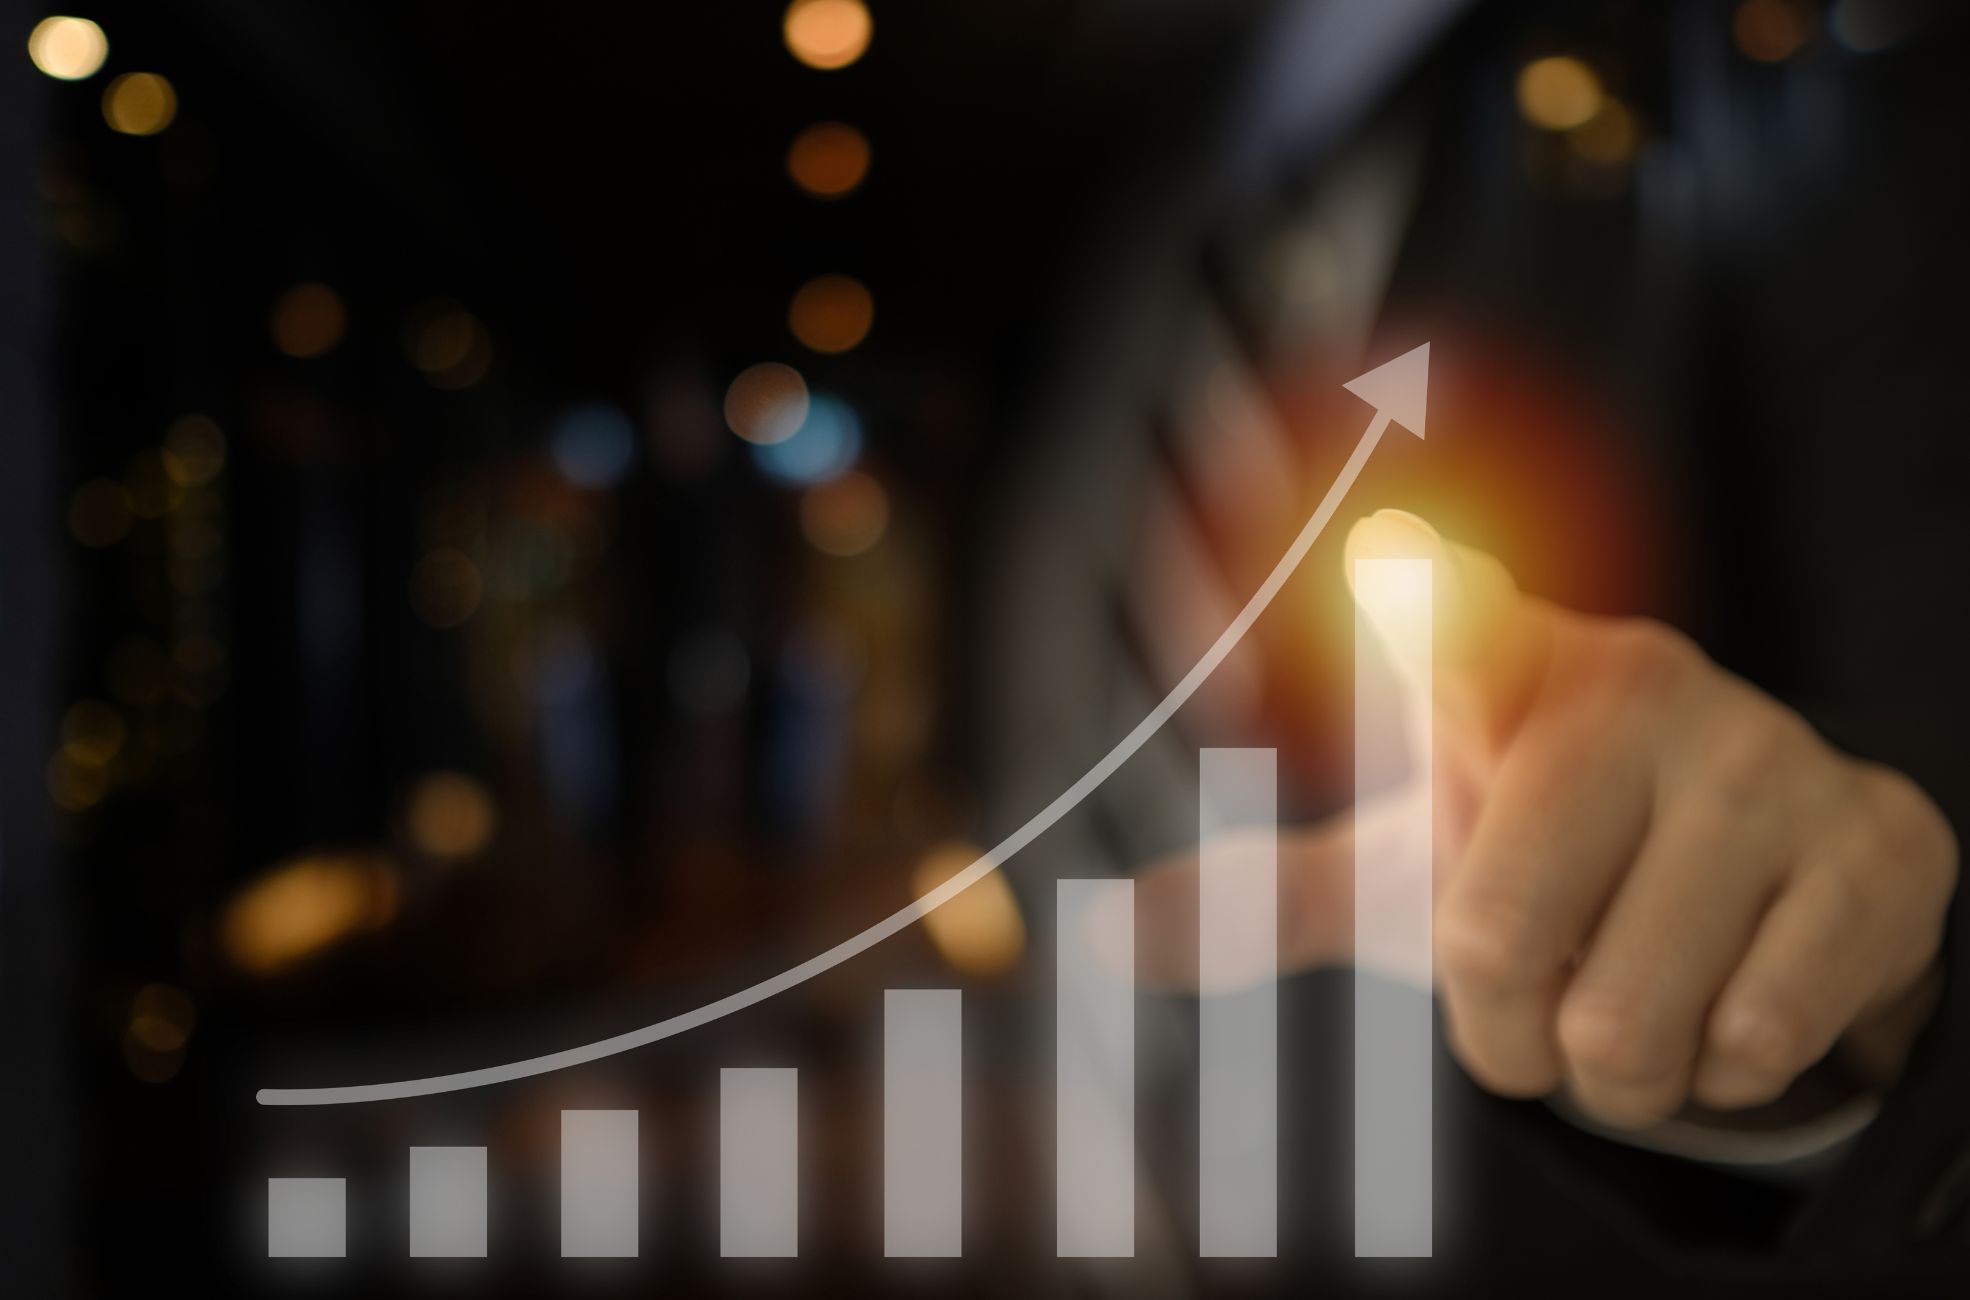 Stock Photo Showing A Business Strategy Growth With Arrow Graph